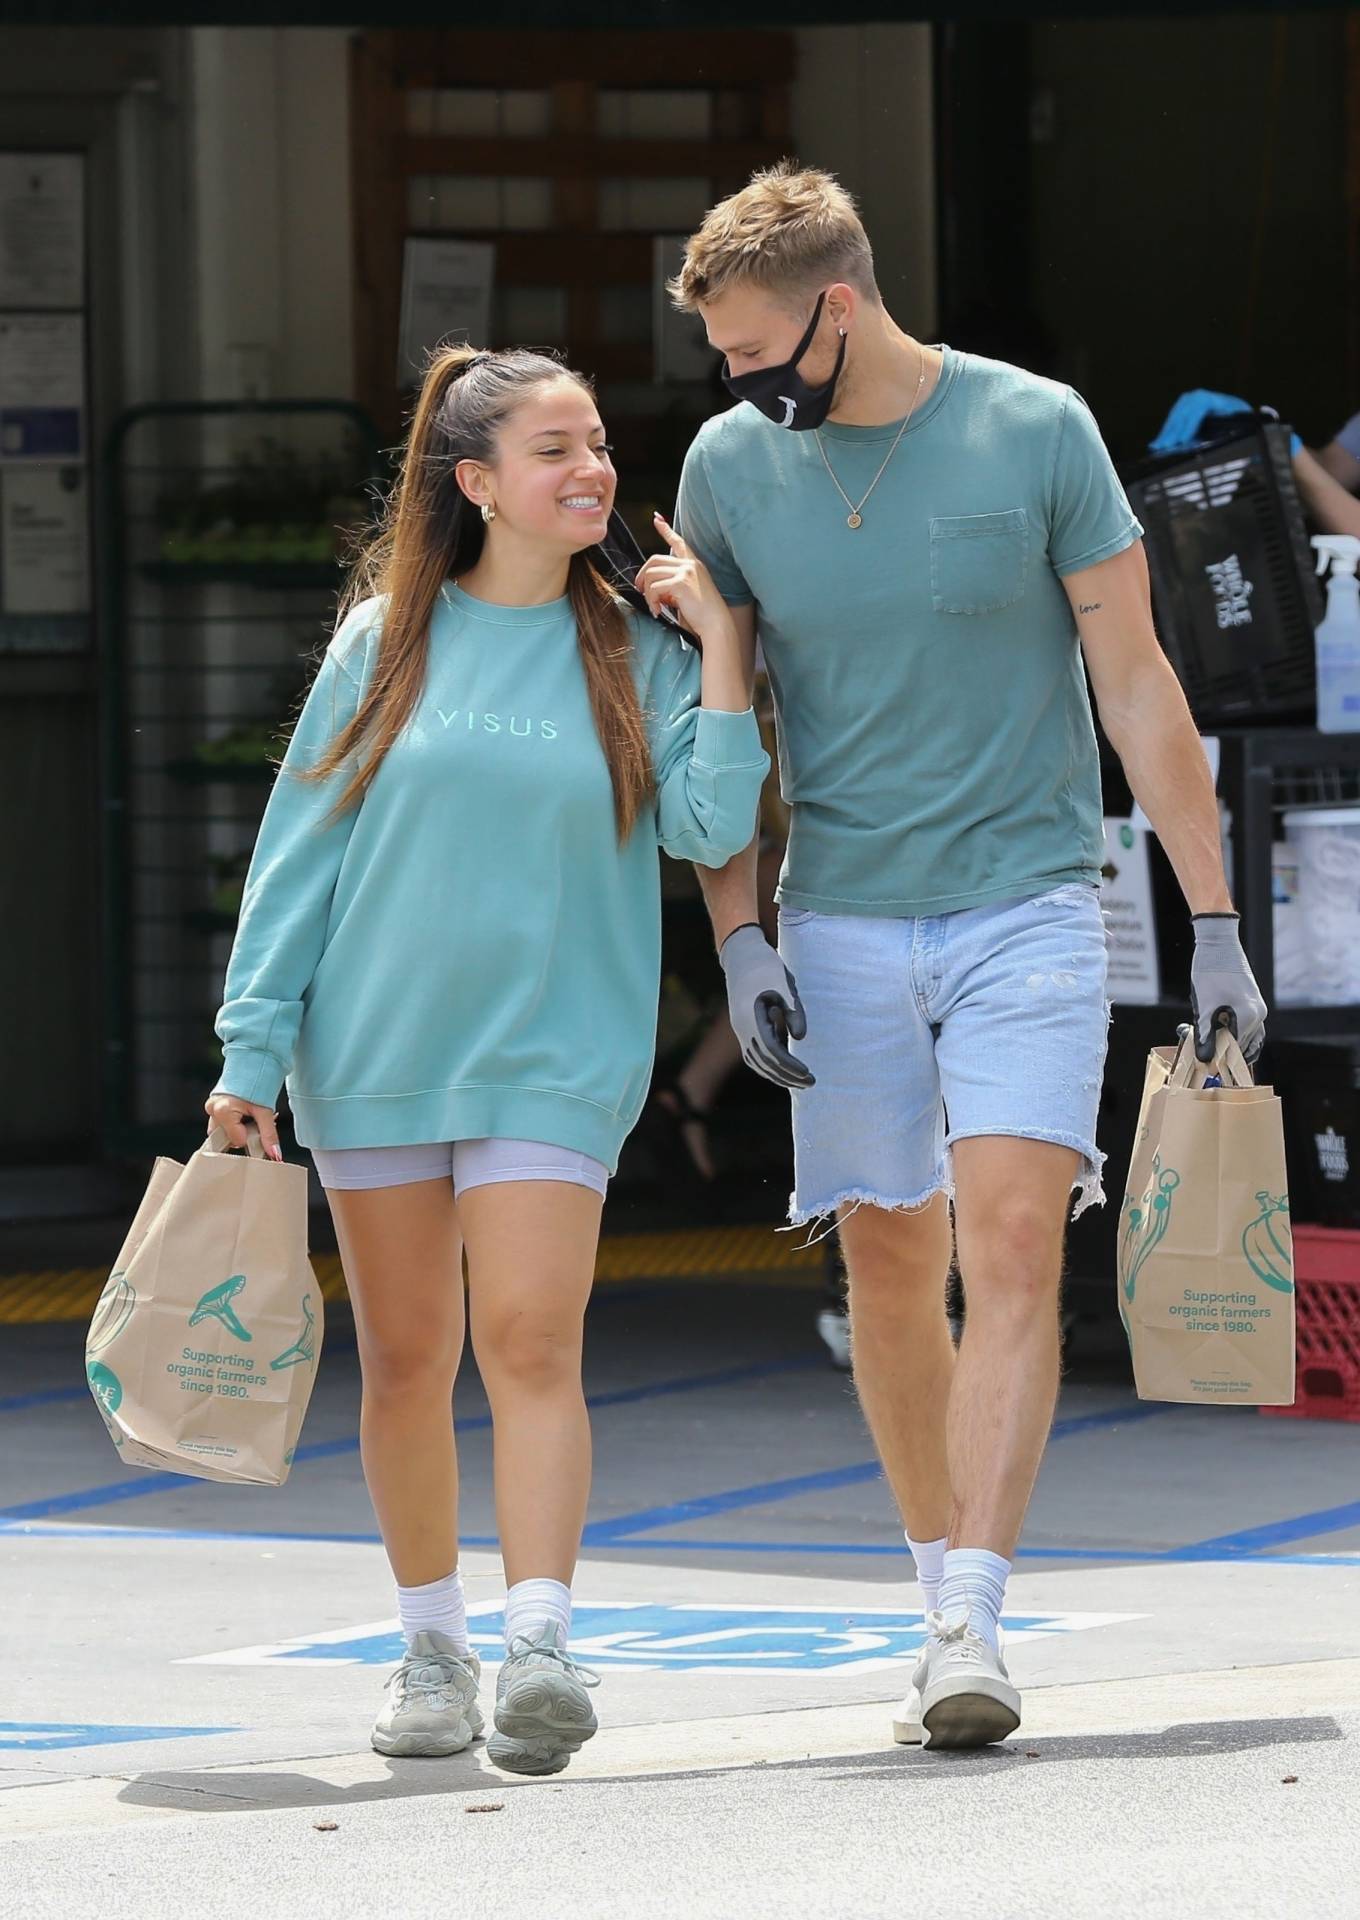 Inanna Sarkis with her boyfriend Matthew Noszka at Whole Food in Los Angeles